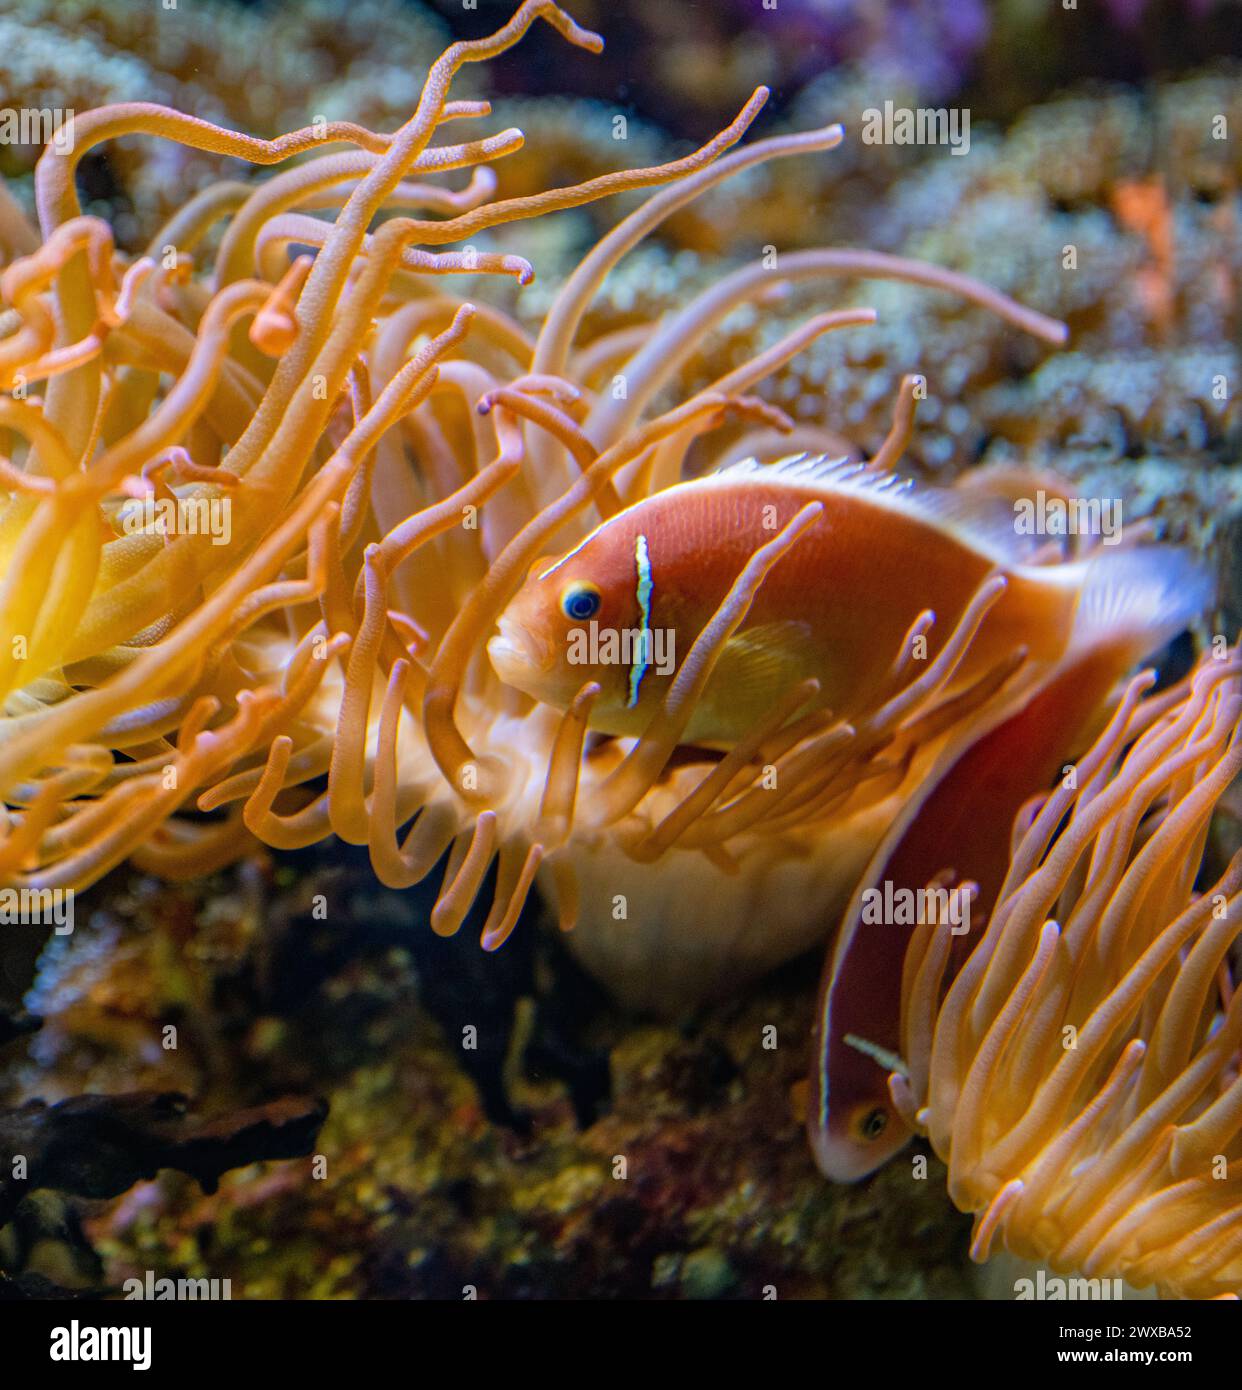 A pair of common anemonefish (Amphiprion perideraion) Stock Photo